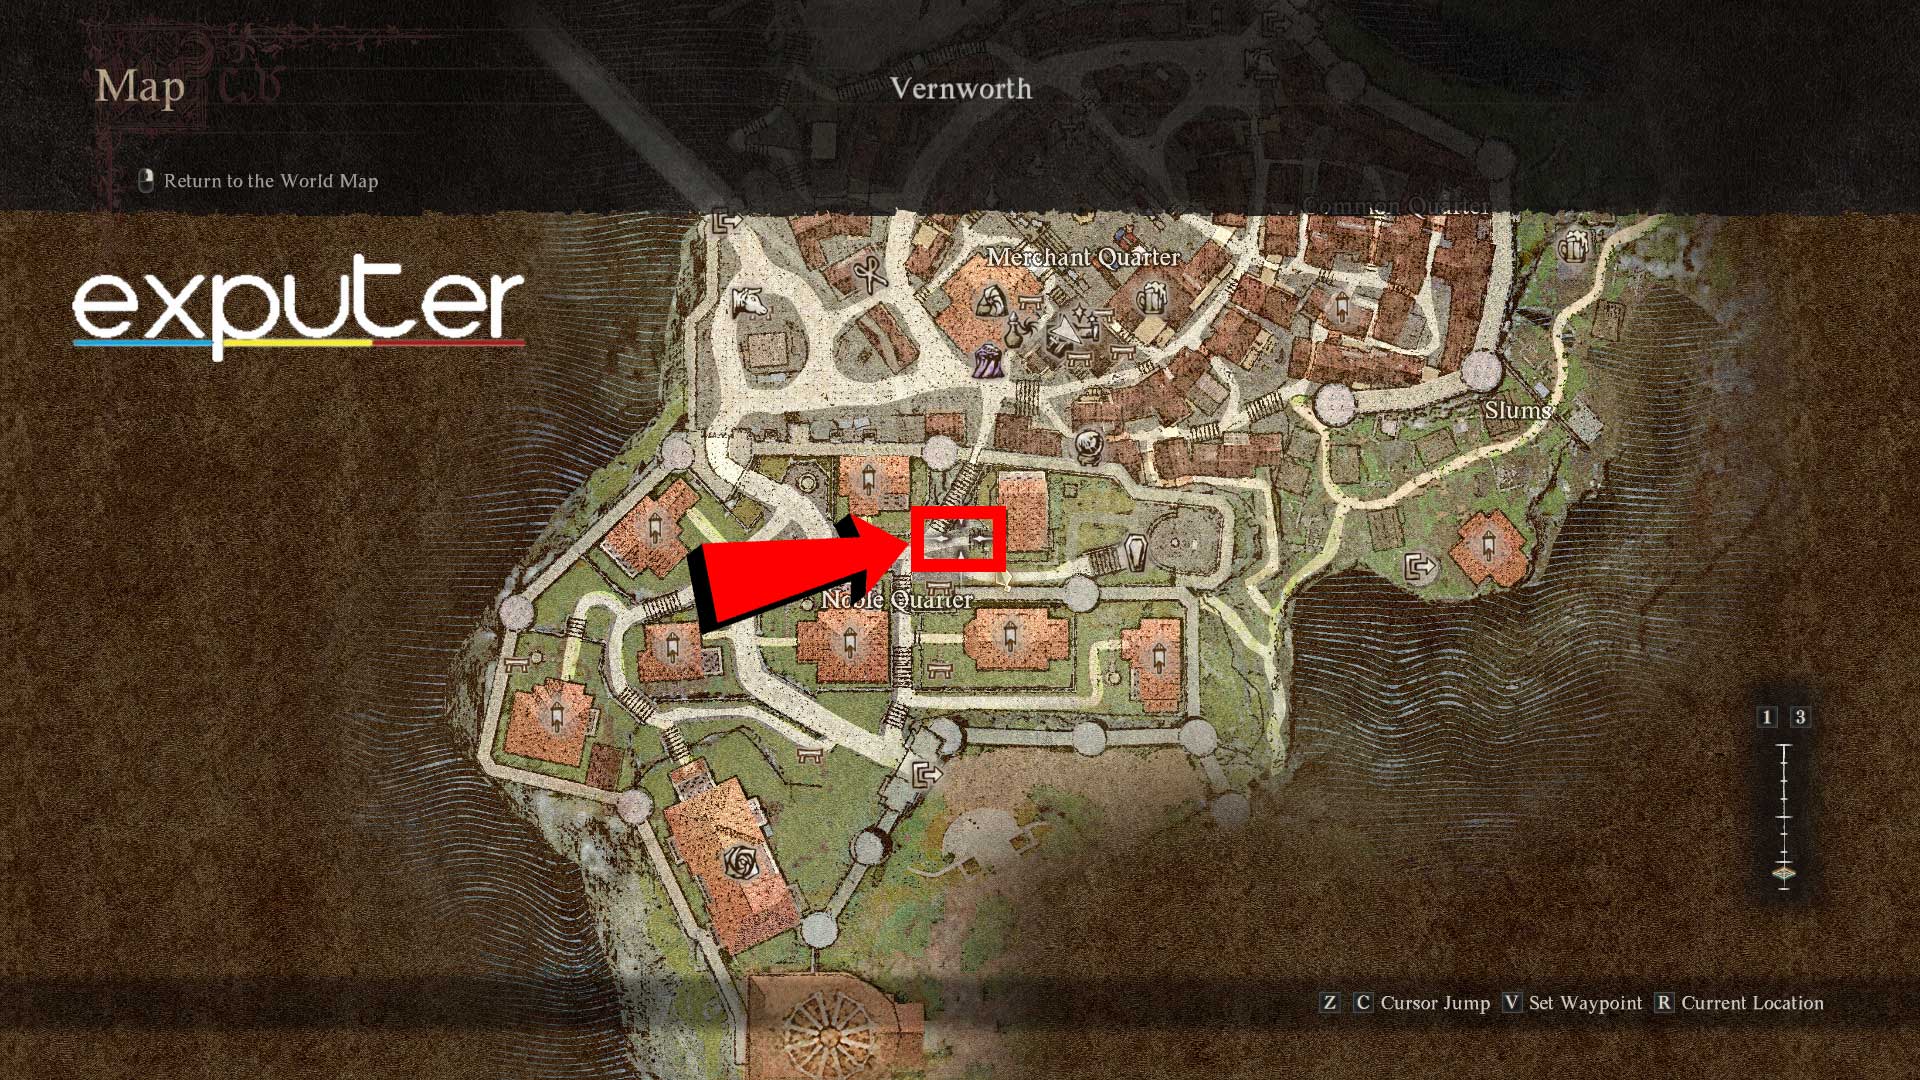 Salvatore's house's location on the Vernworth map. (image taken by eXputer)